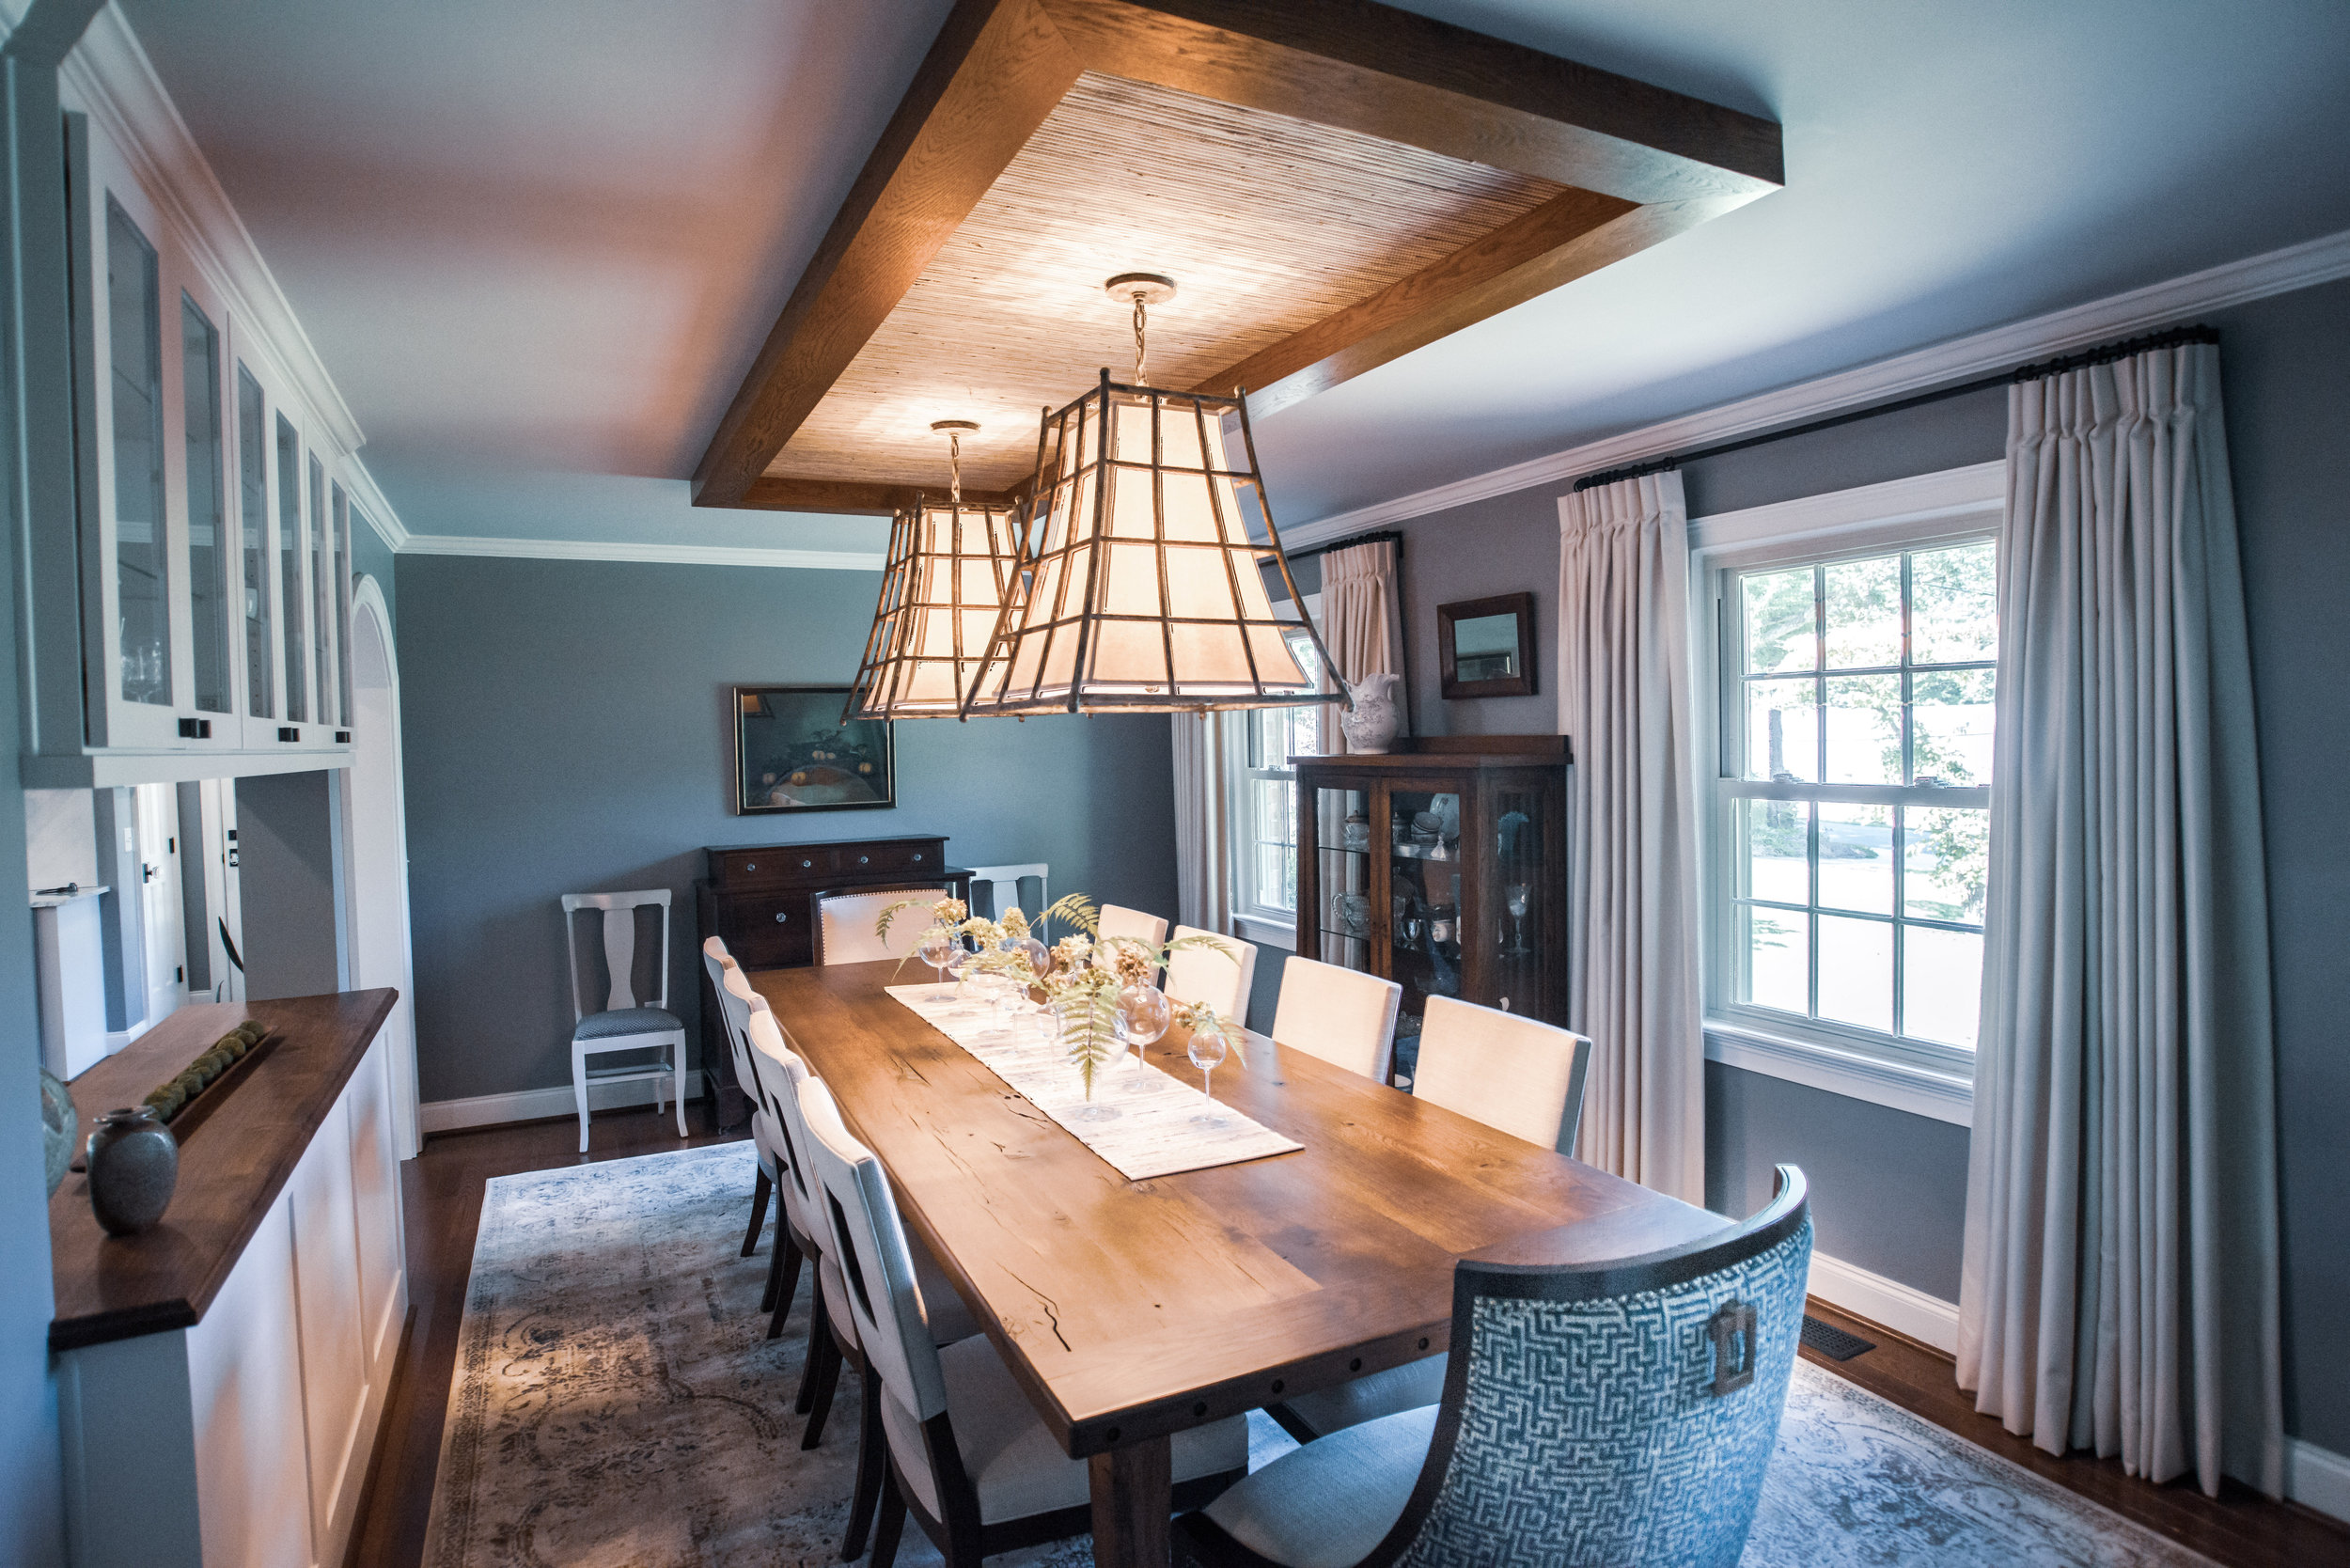 Farmhouse style dining room remodel featuring a custom table for 10, cedar wrapped beams and grasscloth &amp; 2 forged chandeliers  by 180 Spaces, Interior Design | Lake Norman NC